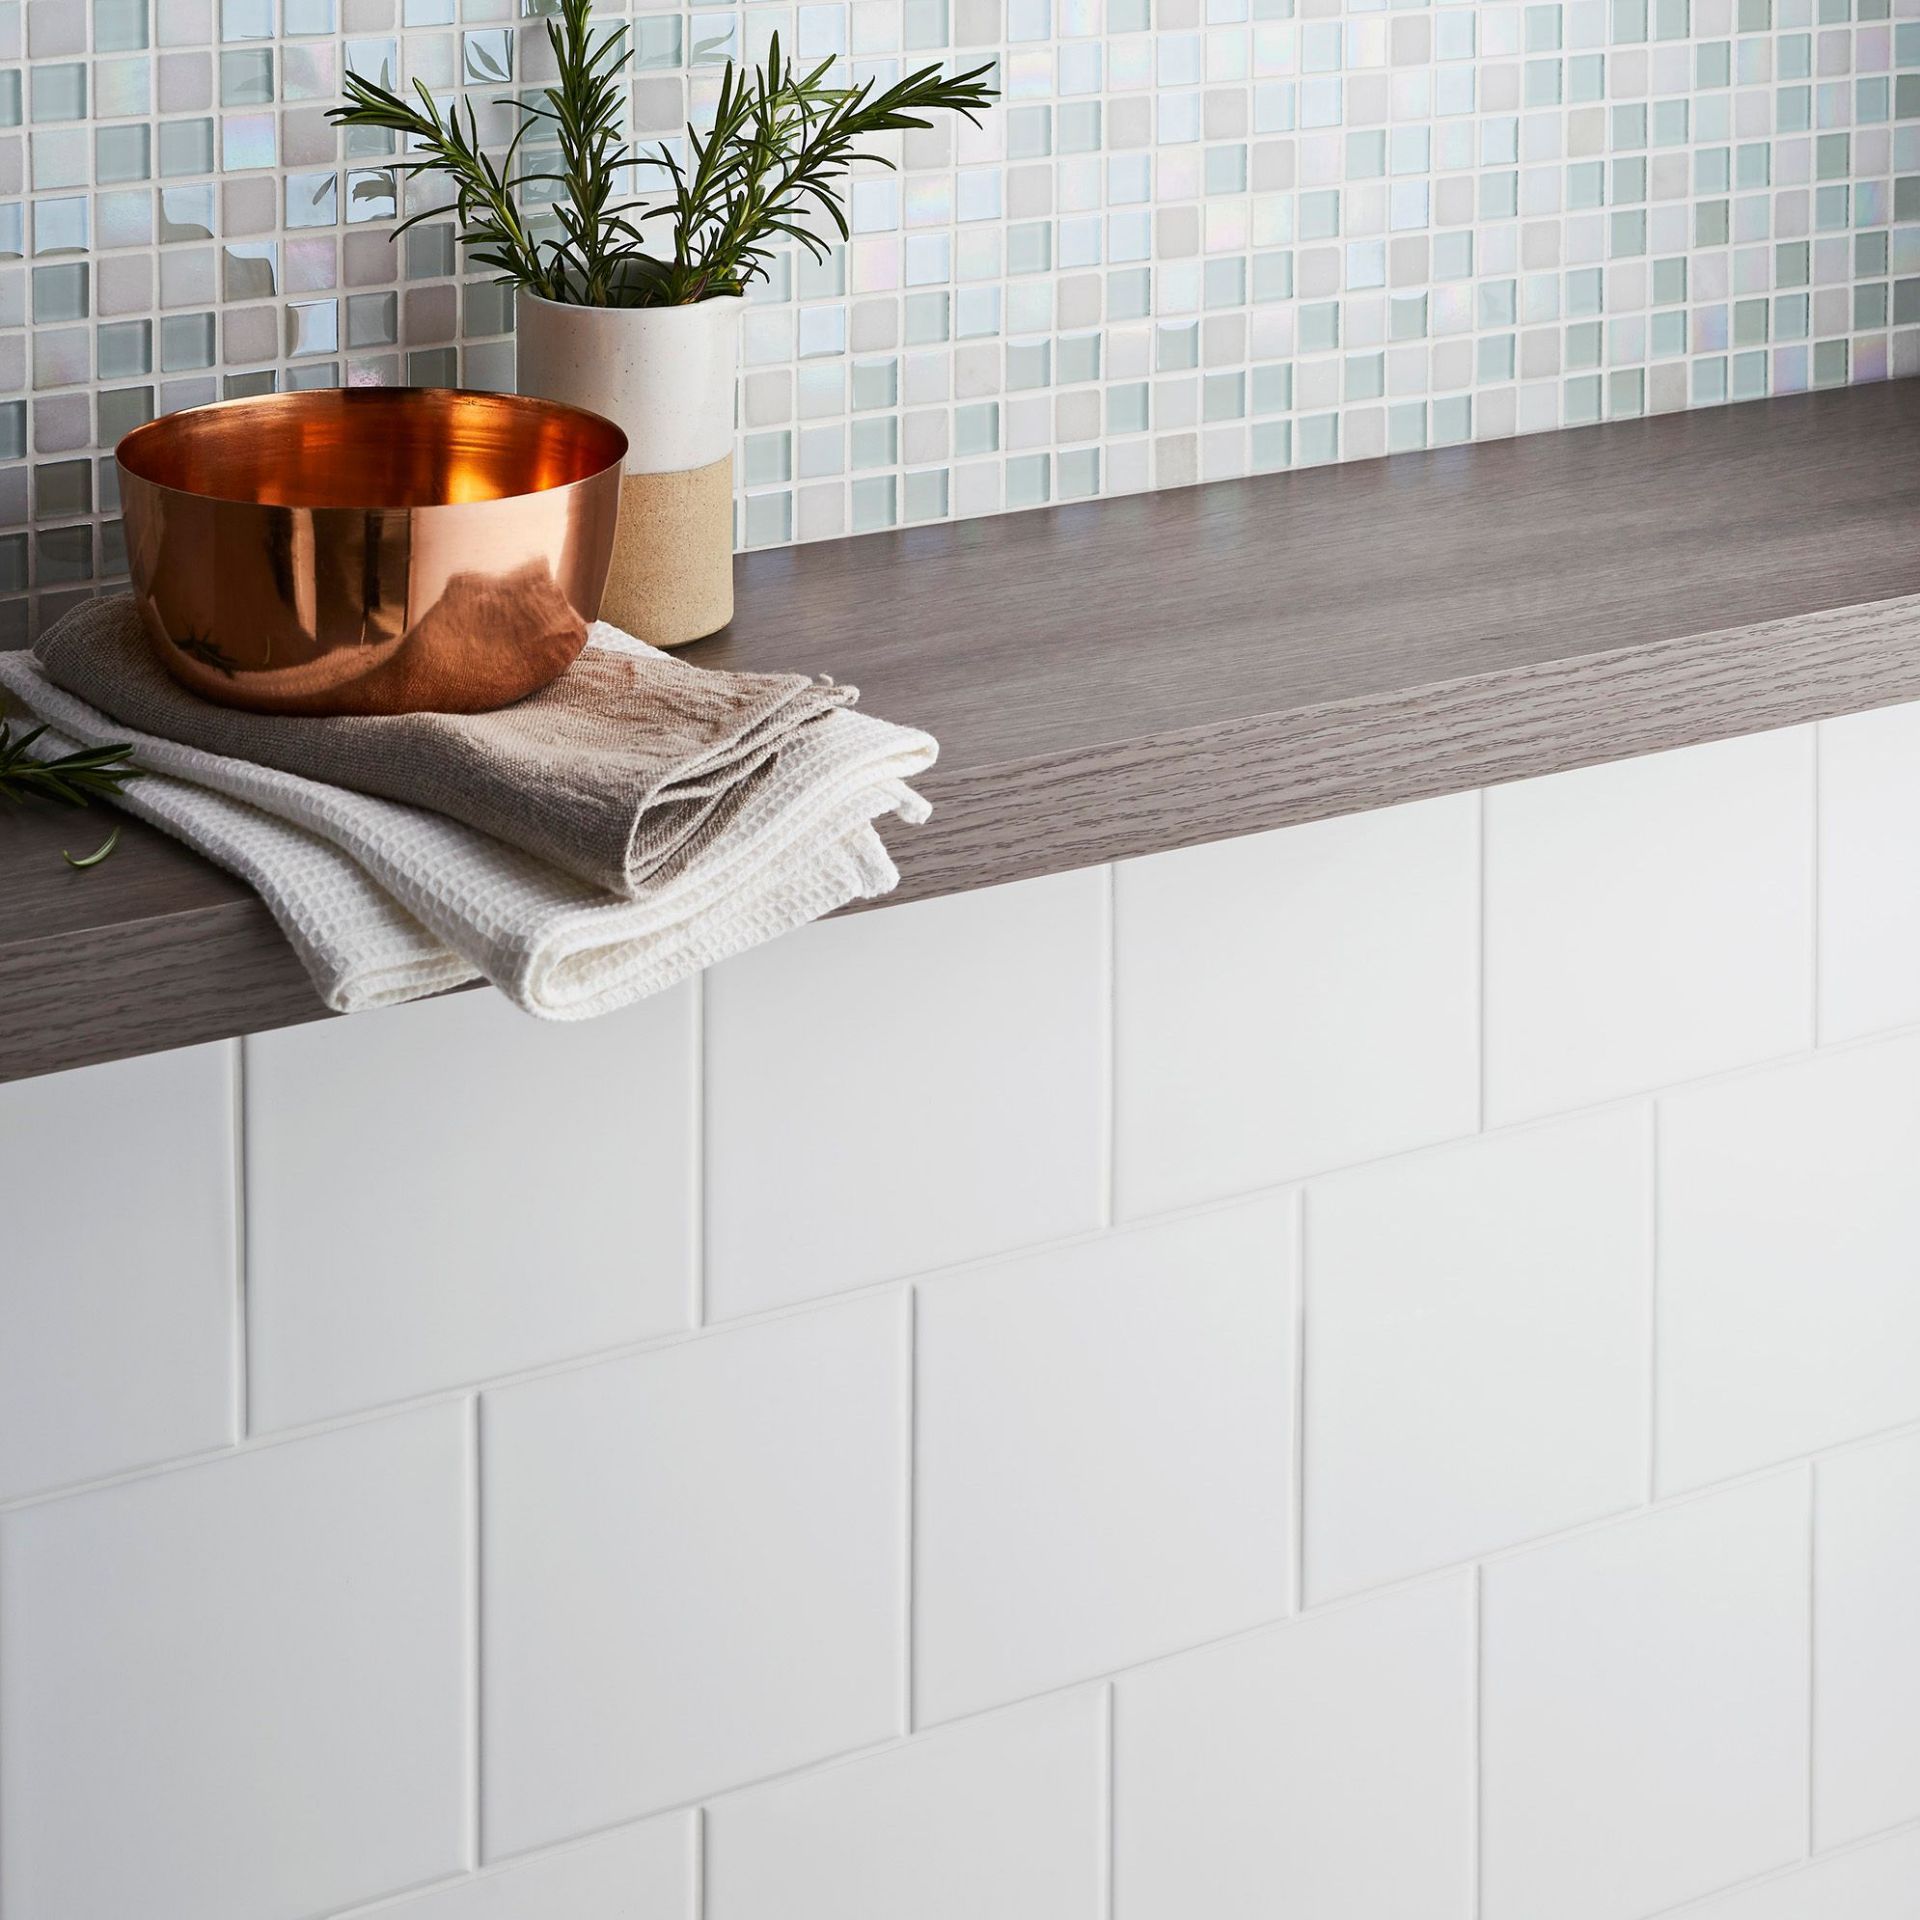 6m2 150x150mm White Square Procelian wall Tiles. White tiles are an essential product that is ... - Image 3 of 4